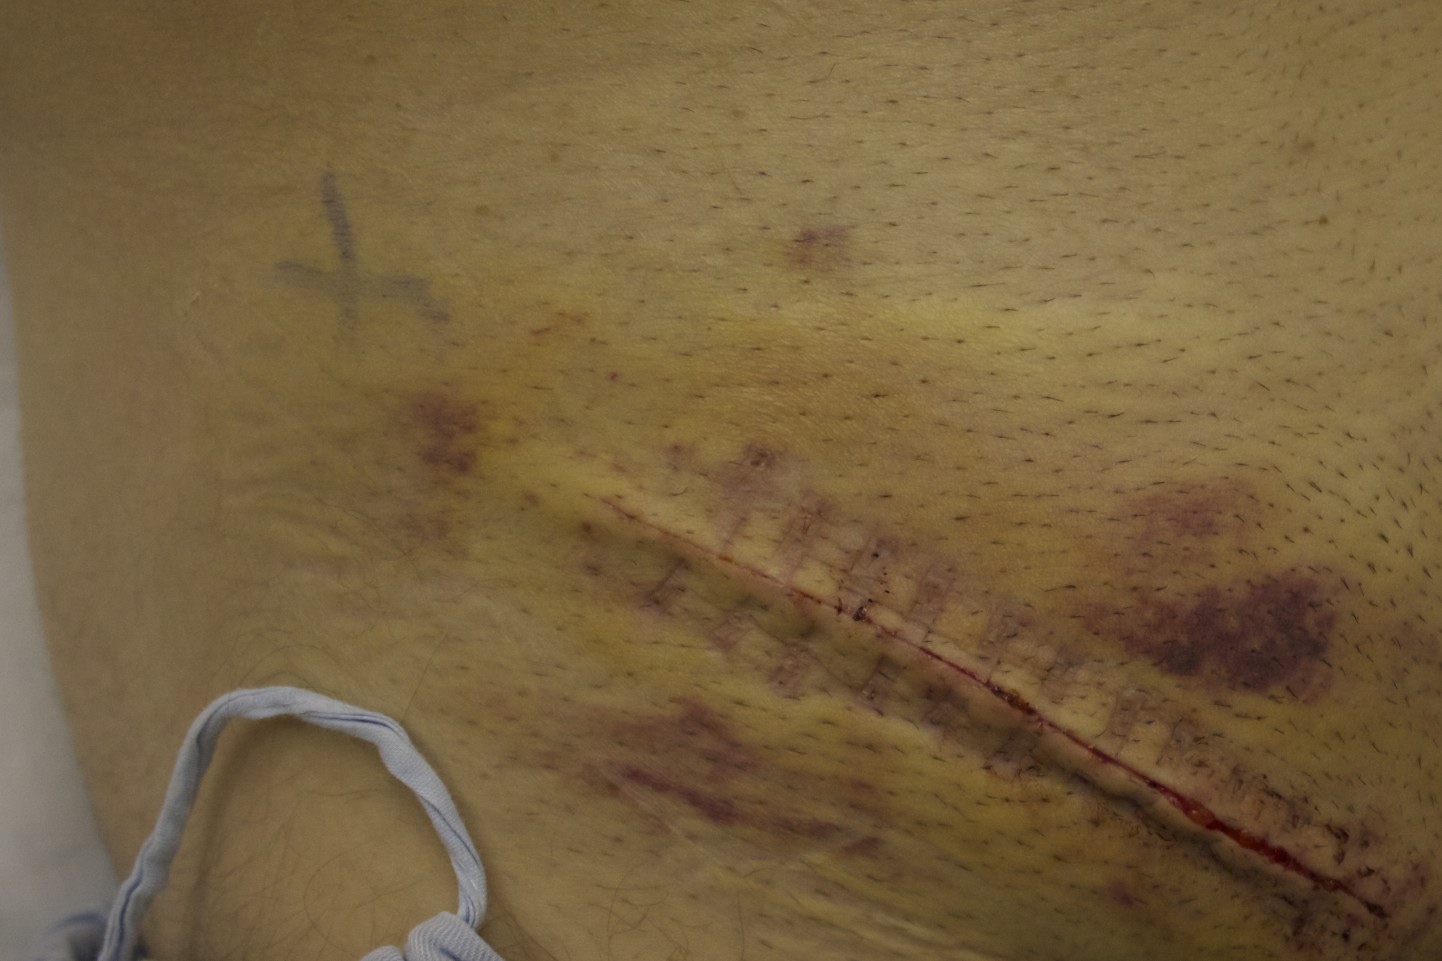 Why would you have blood mixed with urine from a catheter after hernia surgery?